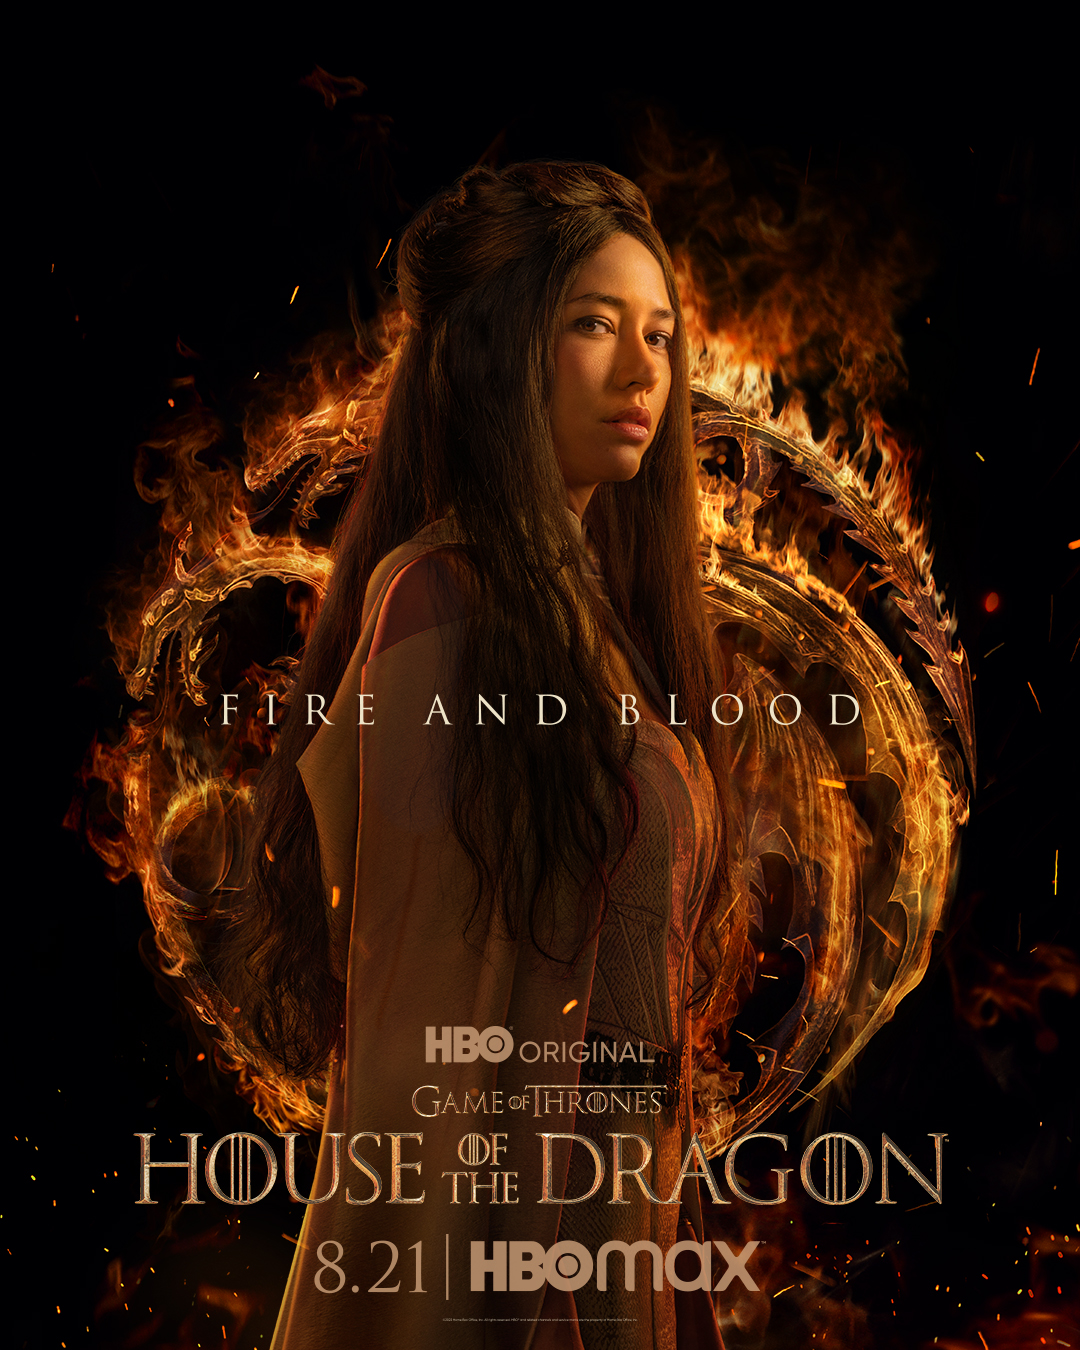 Game of Thrones - House of the Dragon [HBO - 2022] FR8dvBcWUAA57Po?format=jpg&name=large